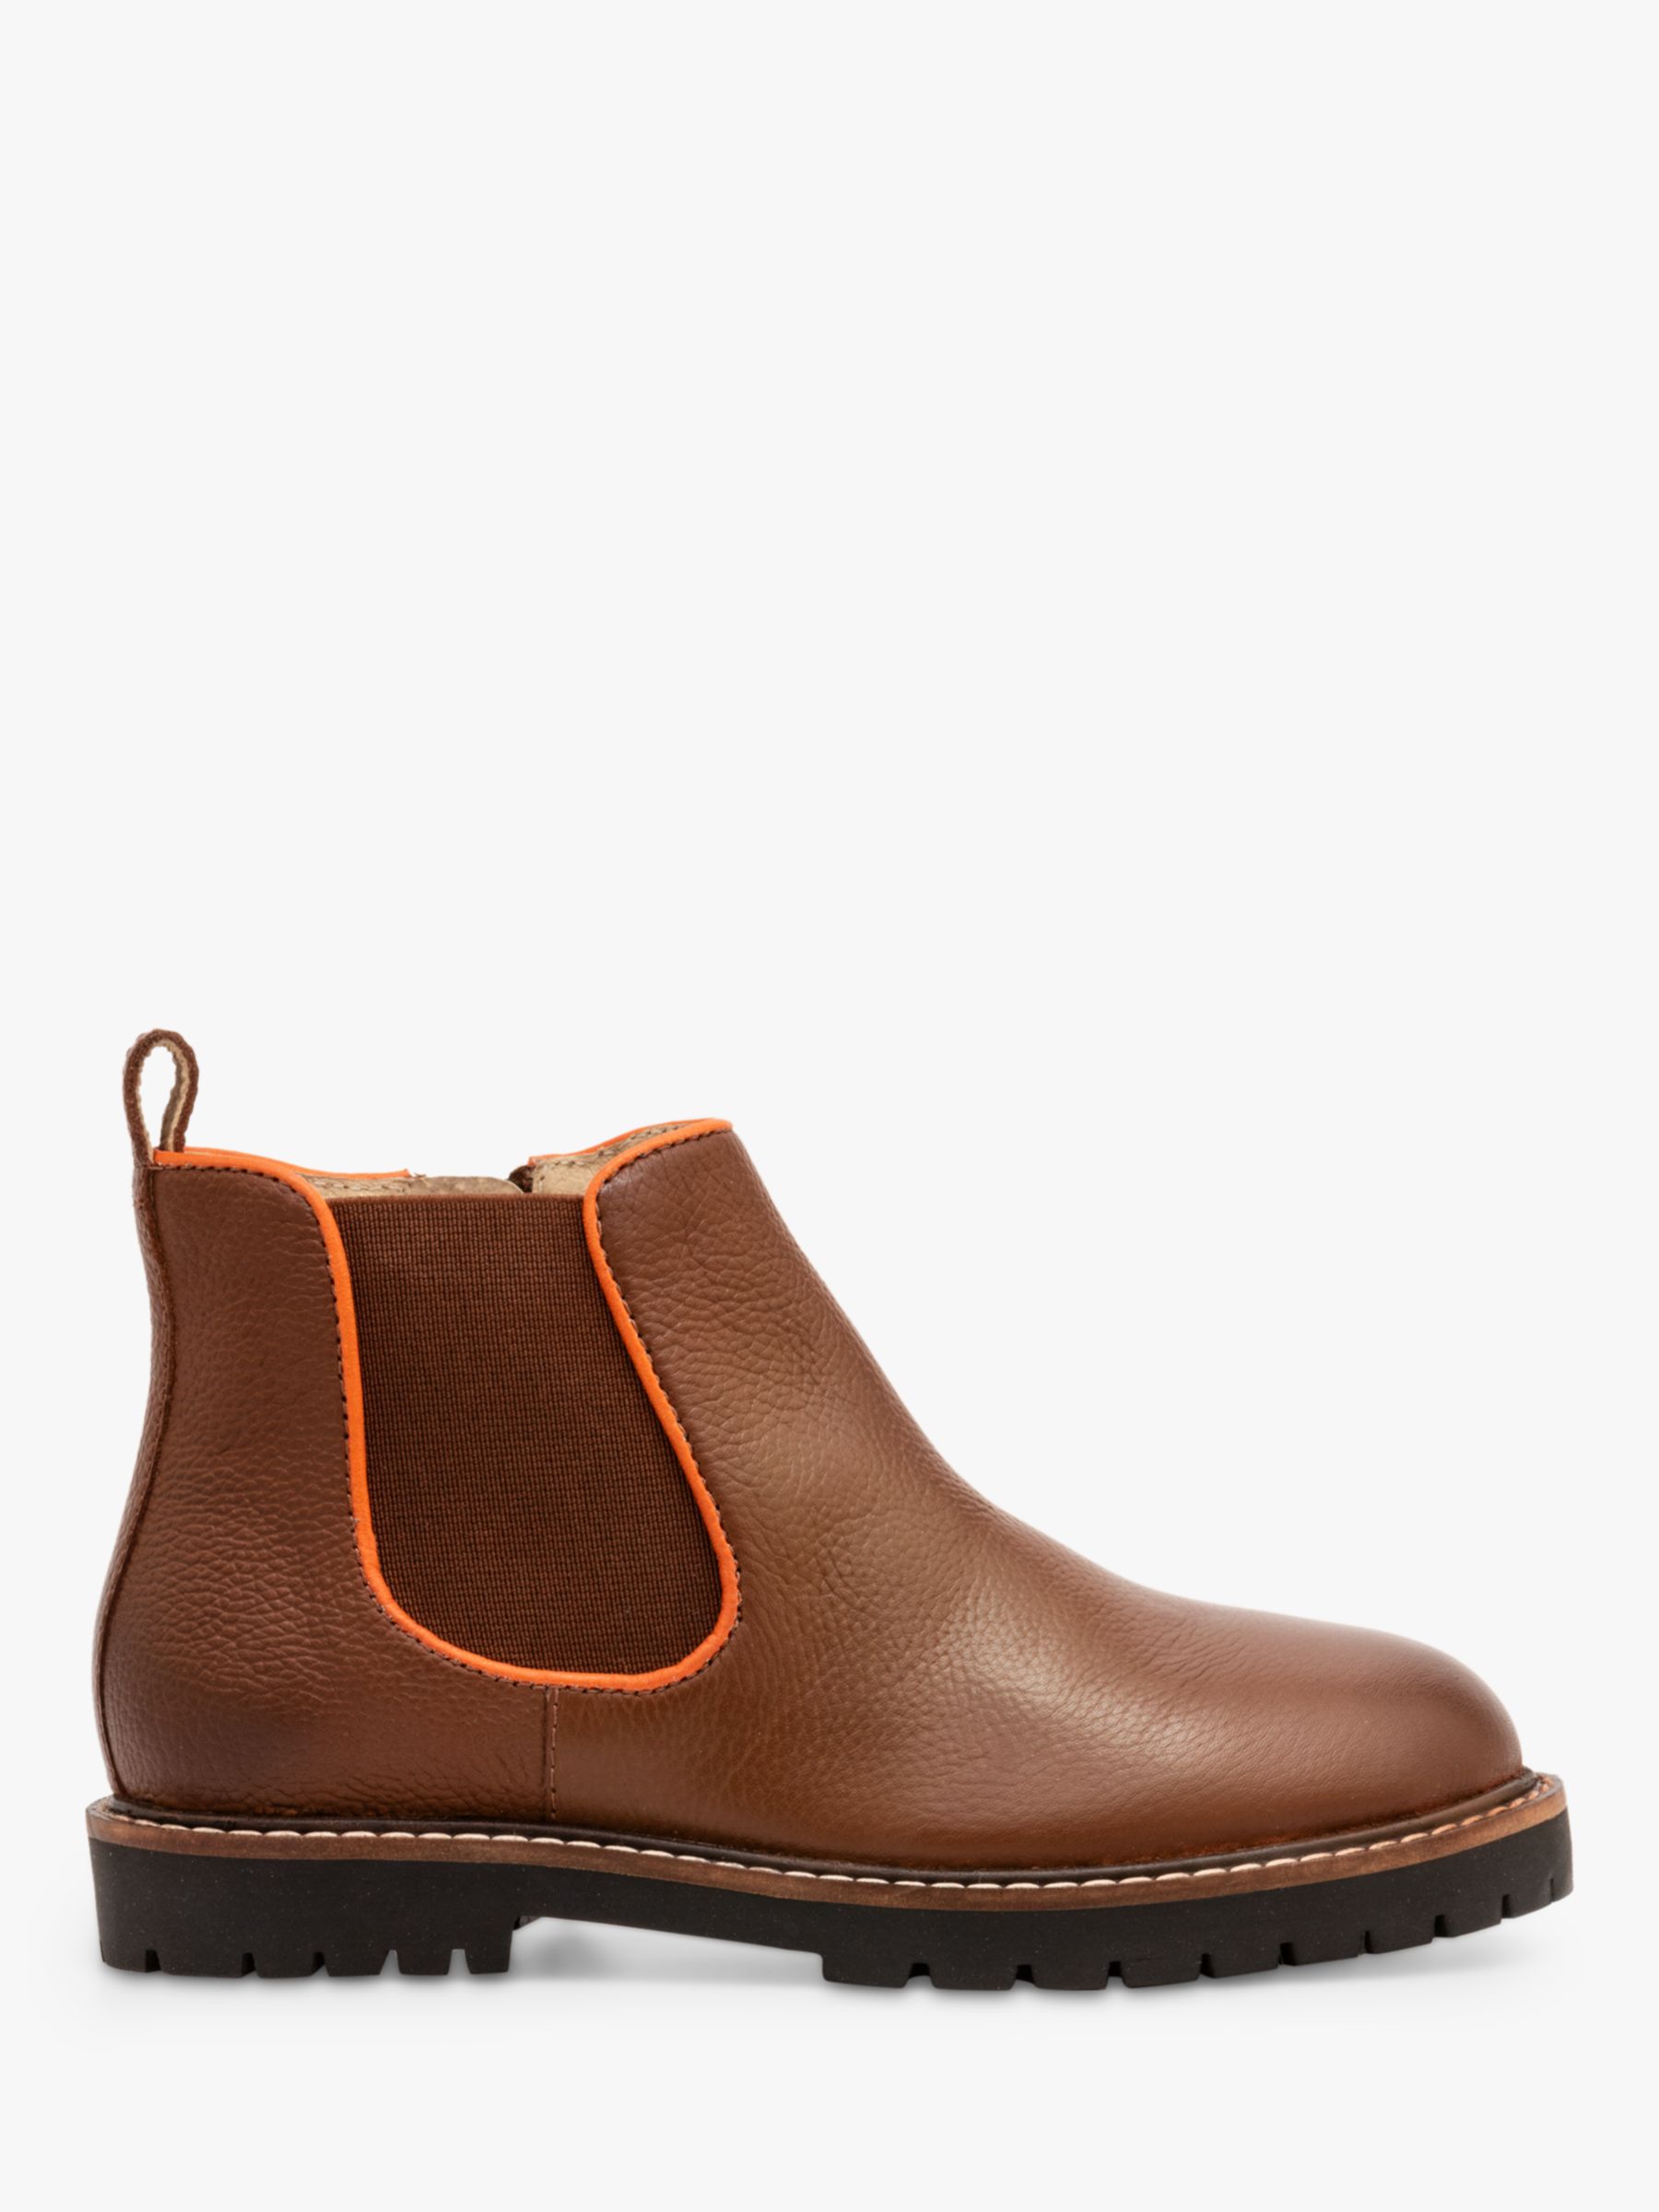 Mini Boden Leather Chelsea Boots